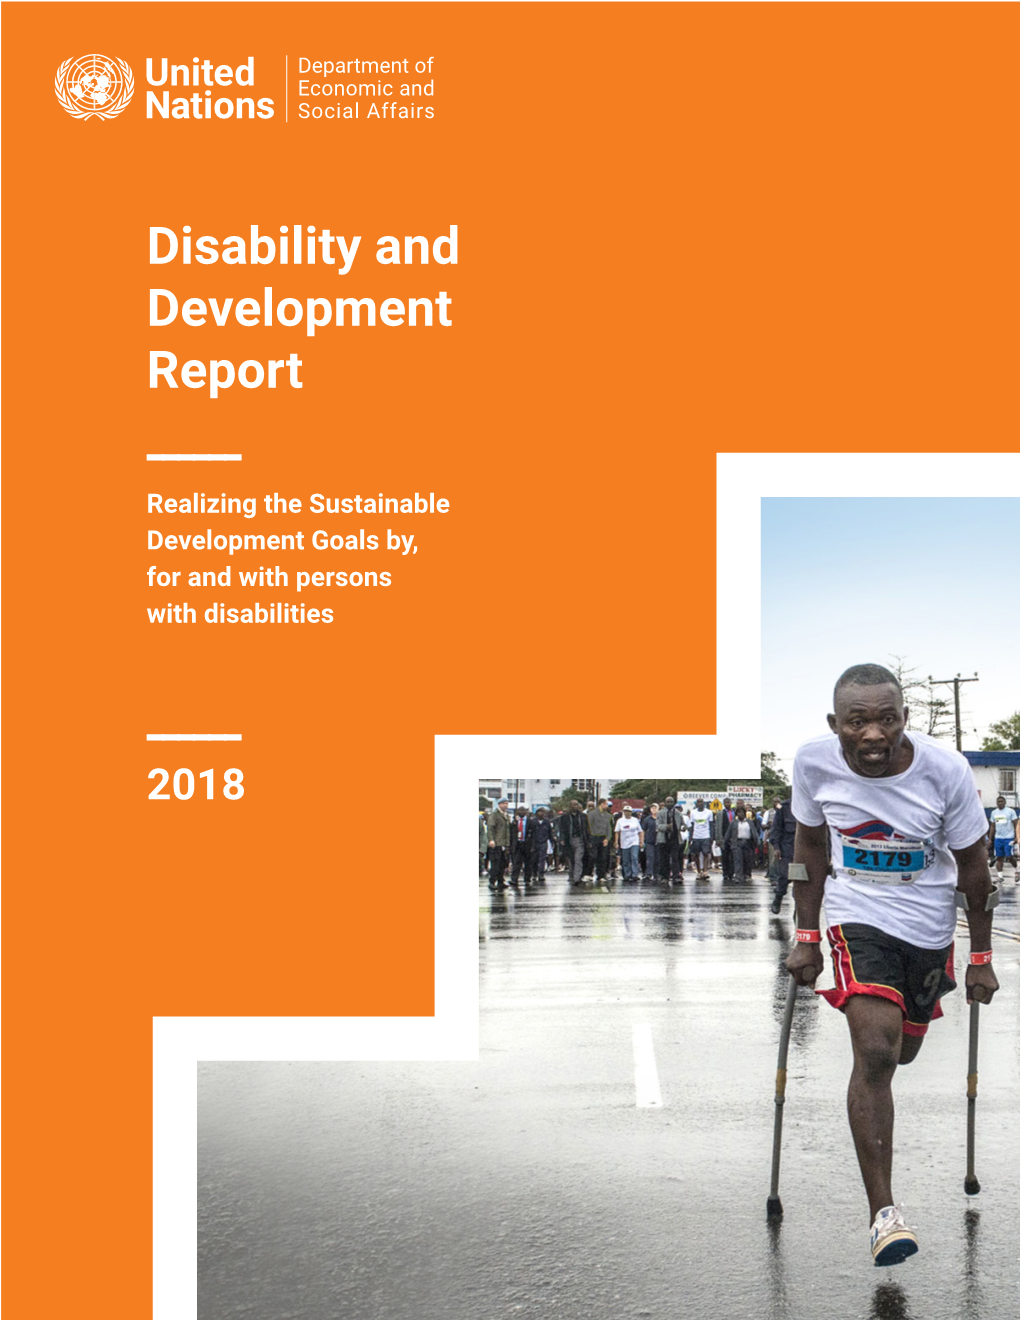 UN Flagship Report, Disability and Development Report – Realizing the Sdgs By, for and with Persons with Disabilities, 2018, Comes at a Critical Time